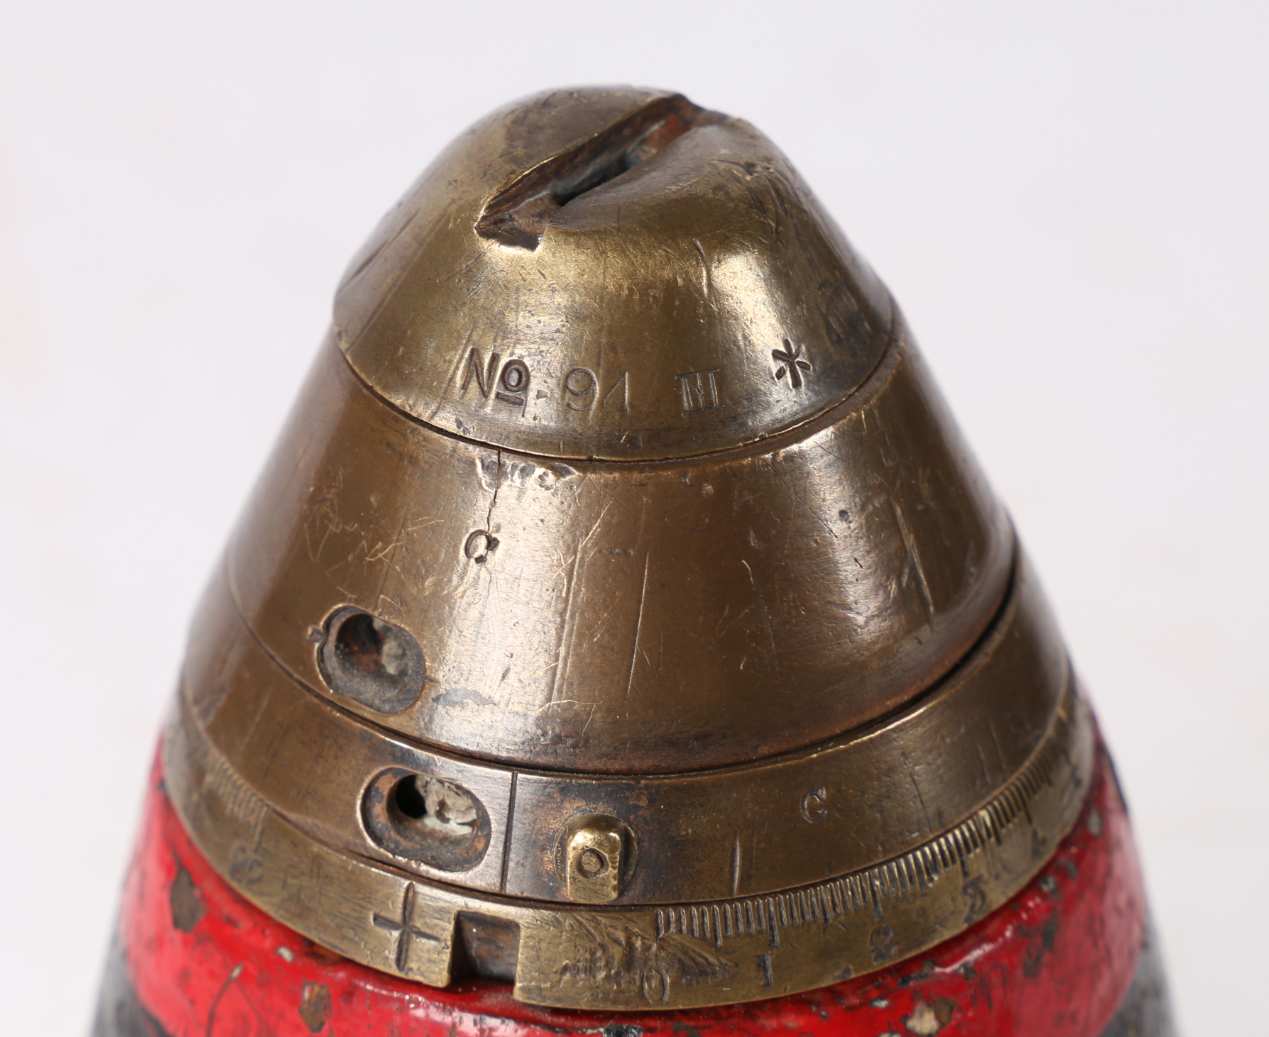 First World War British large calibre shell projectile with No.94 Fuze dated 5/18, inert - Image 5 of 6